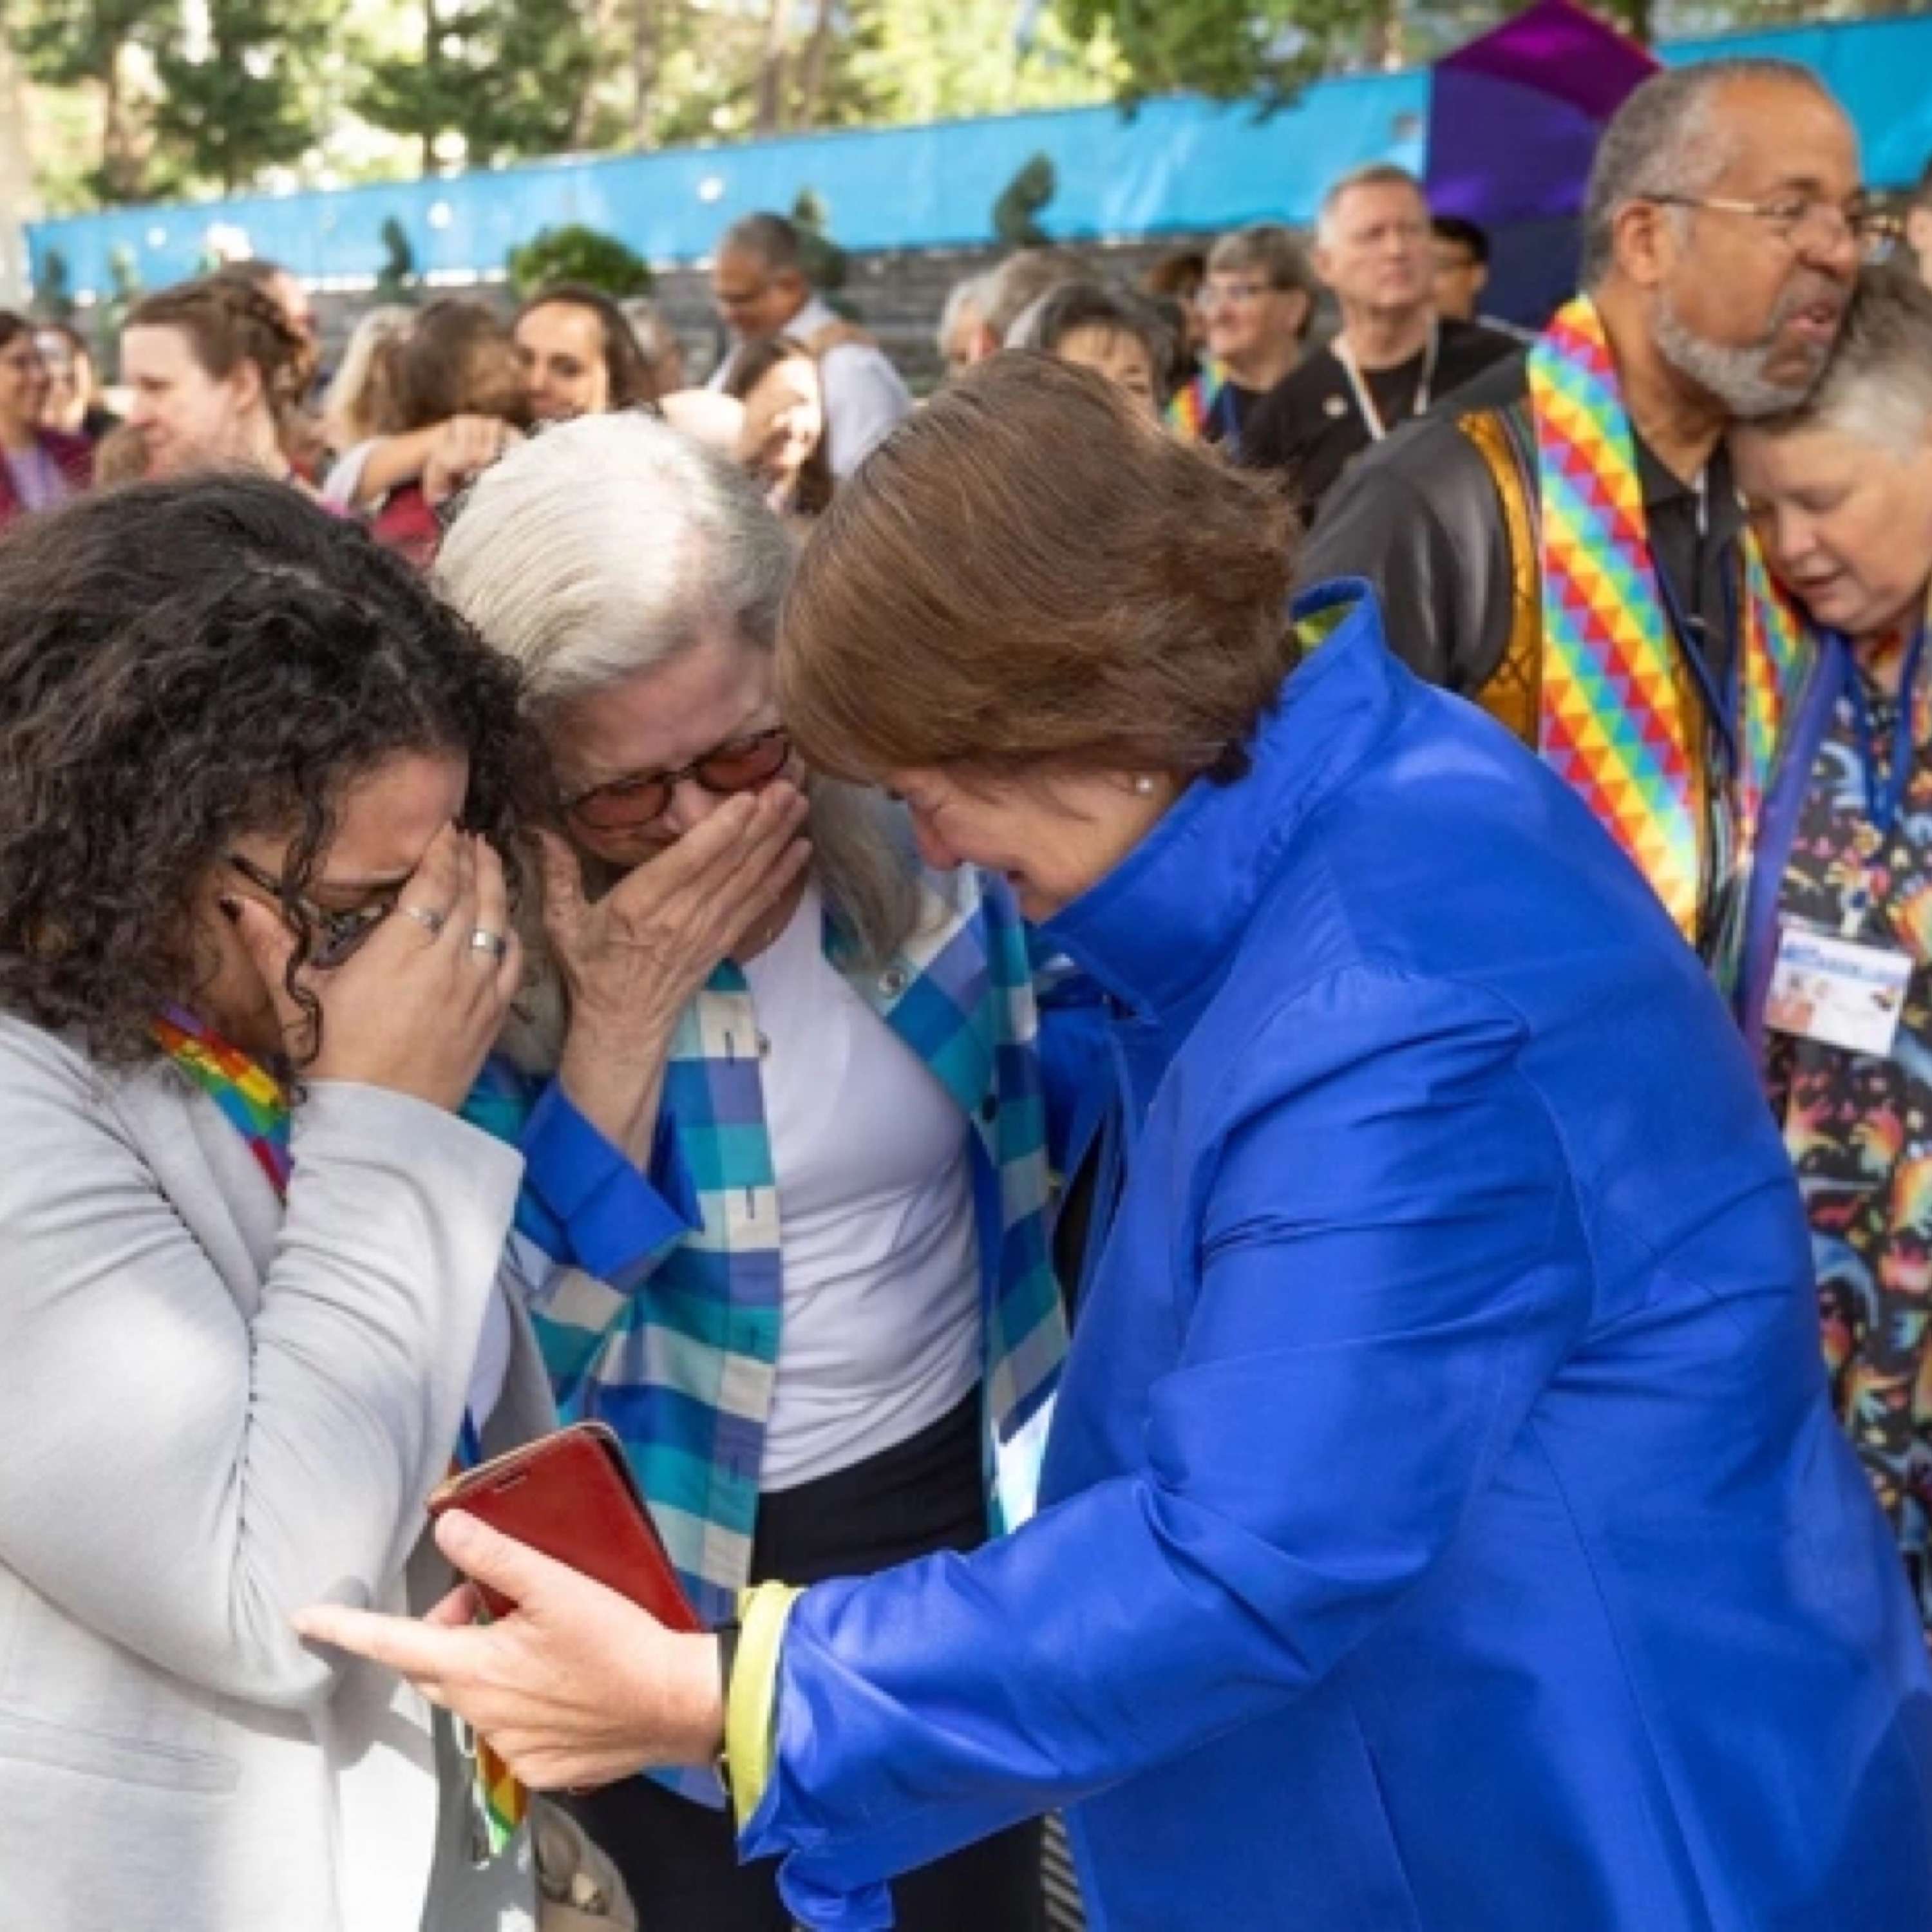 UMC Repeals Ban on LGBT Clergy, Rising Syncretism in the U.S., Eric Metaxas Issues Wake-Up Call for America